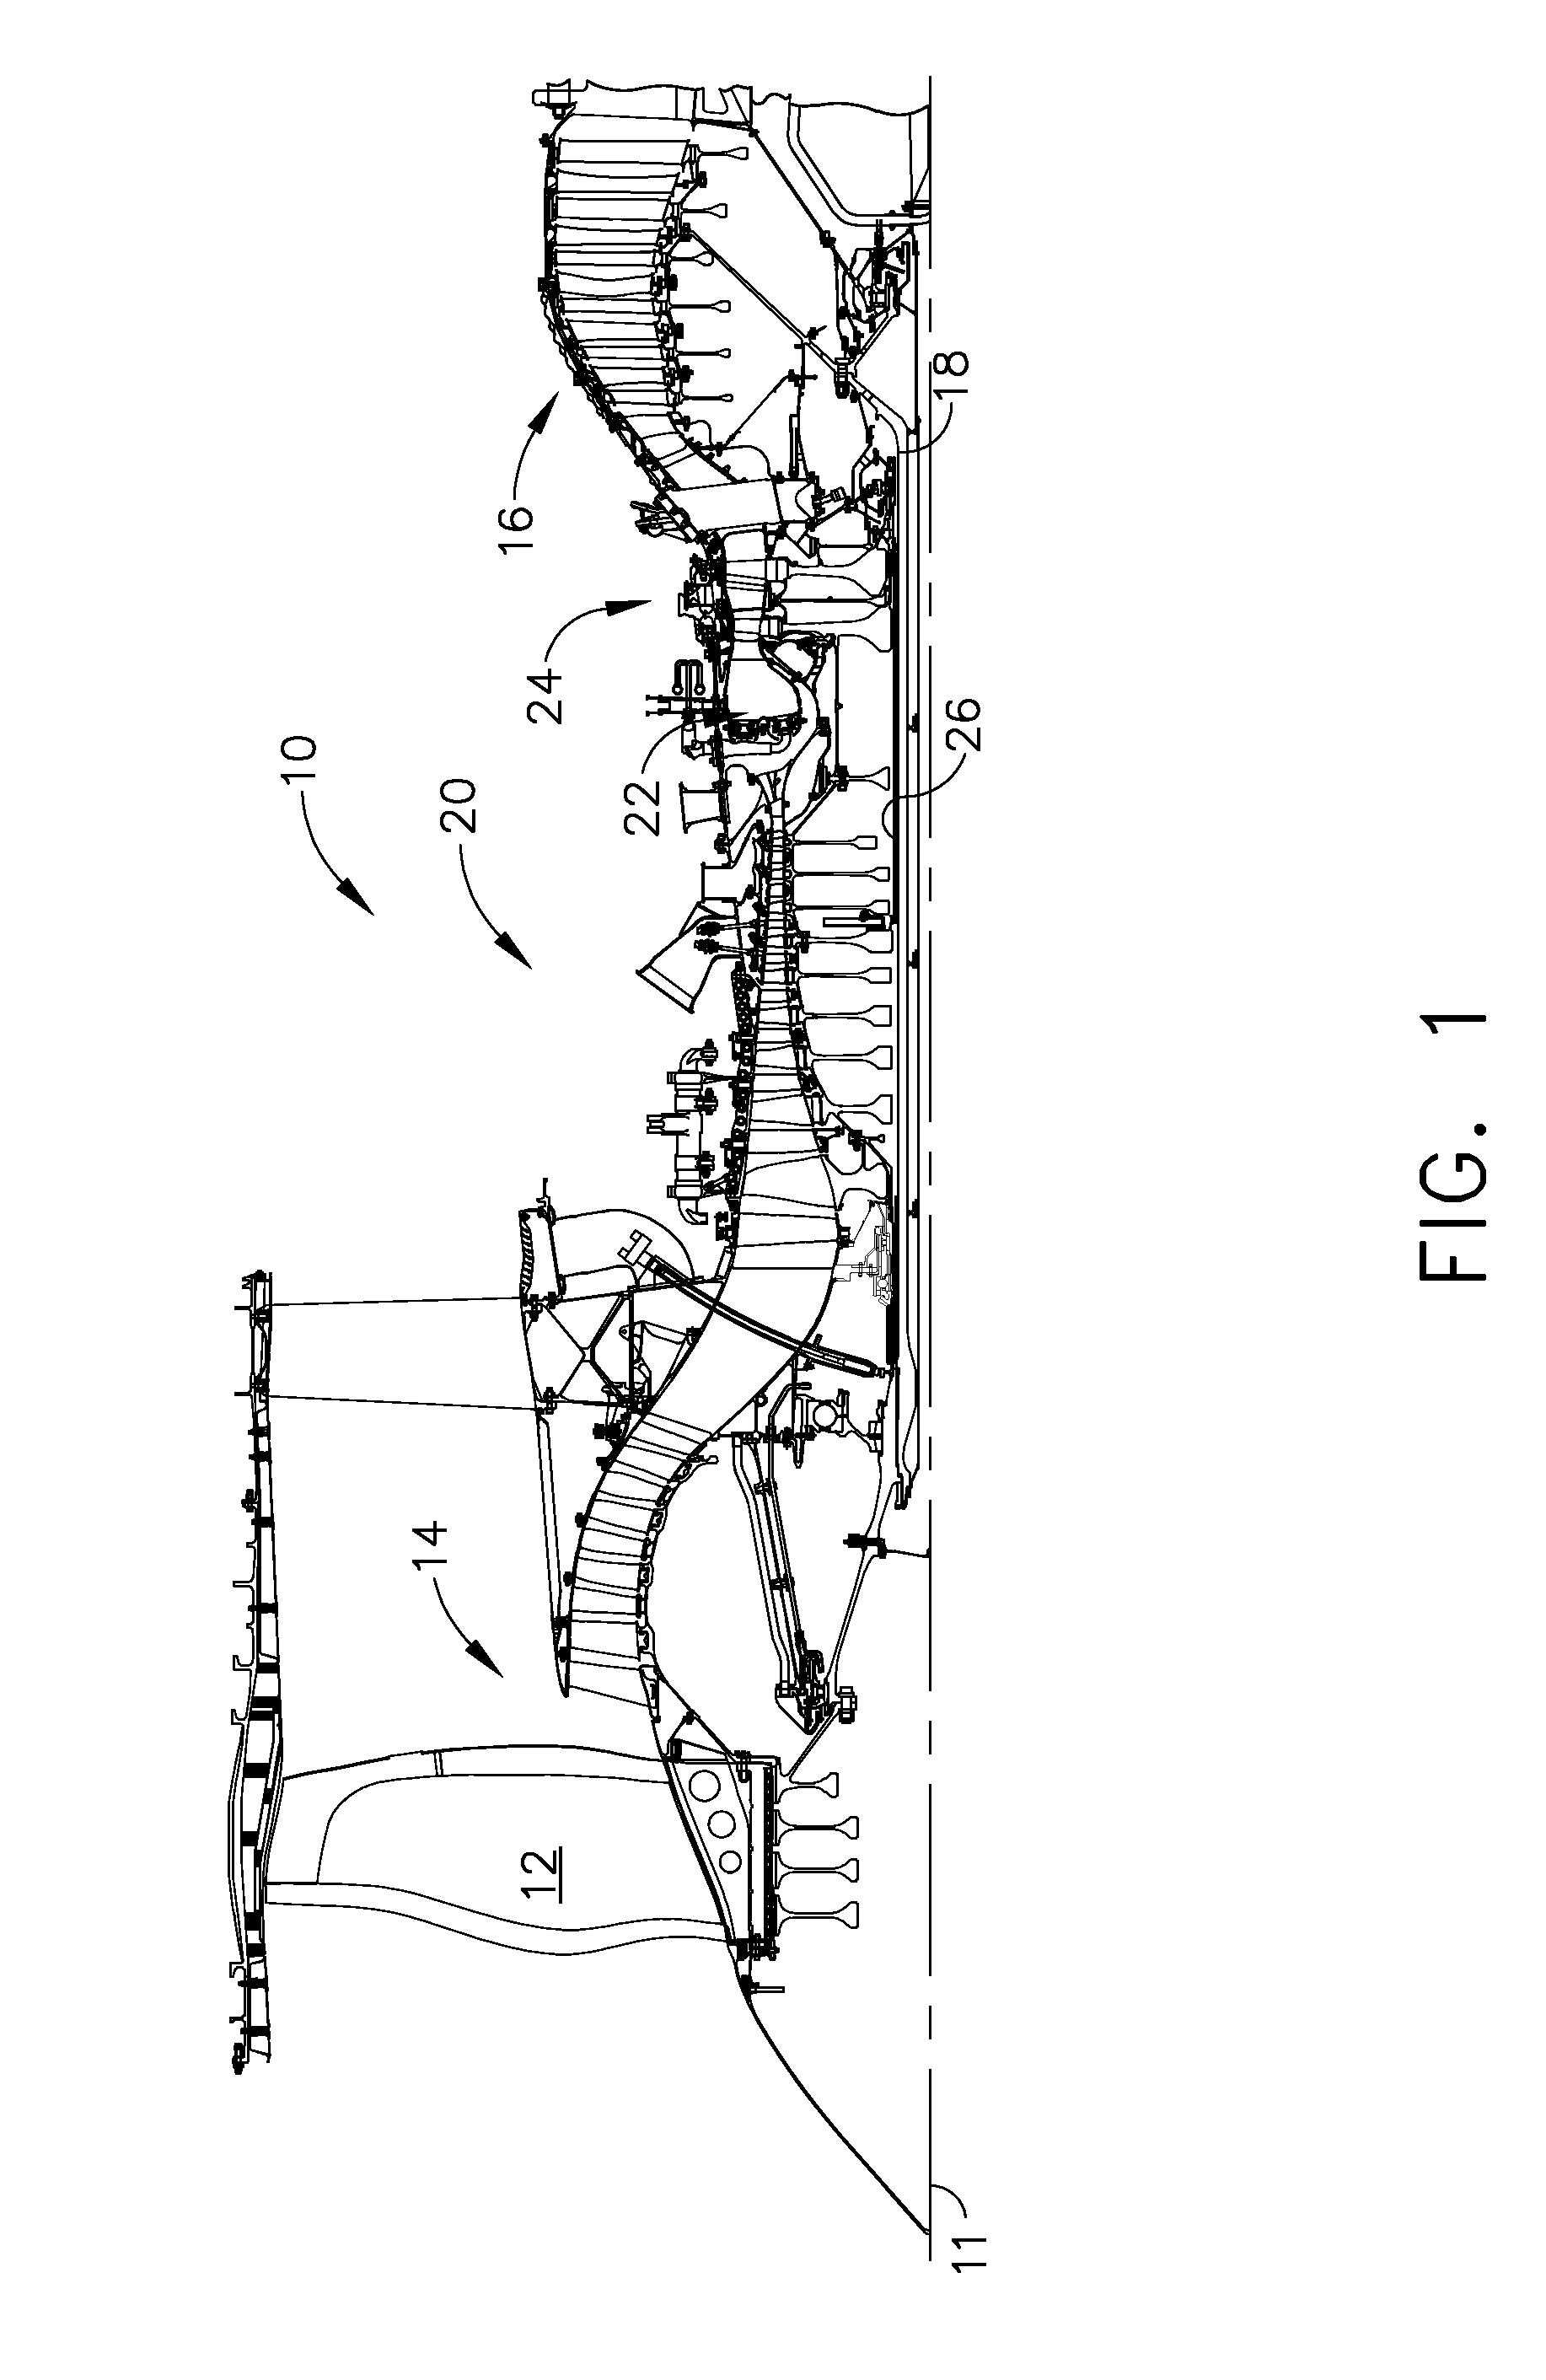 Bearing support apparatus for a gas turbine engine